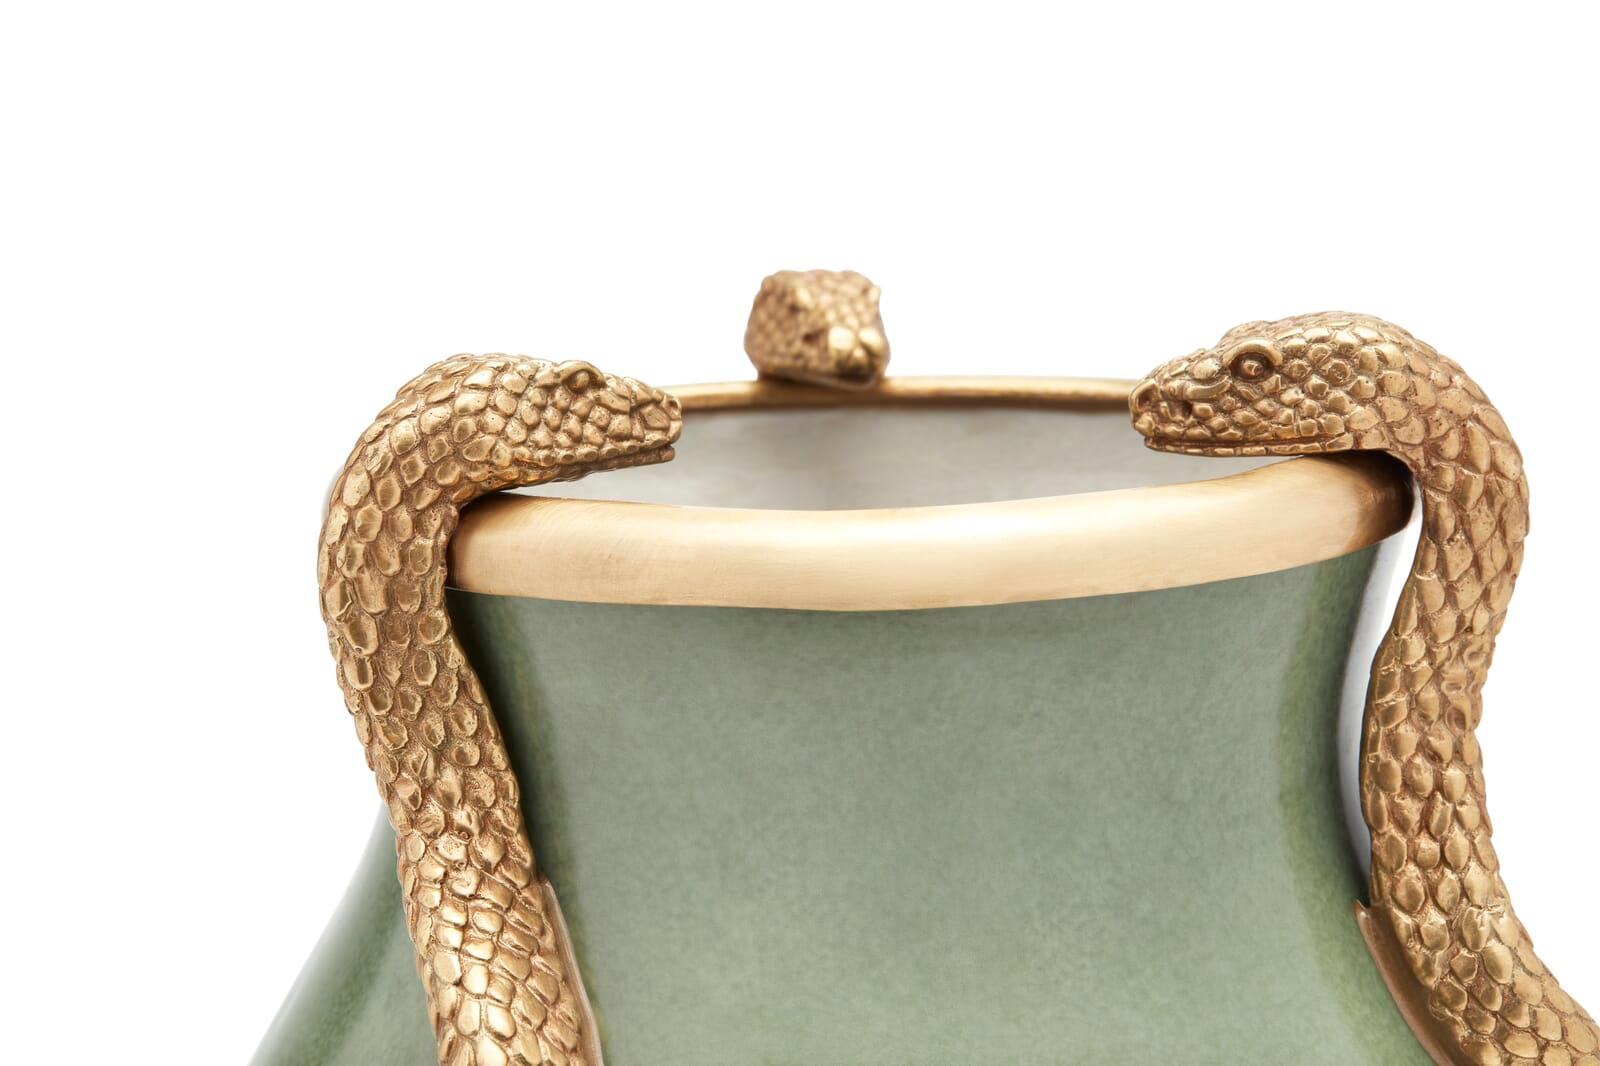 While most vases are made to showcase the flowers within, in the case of SERPENTIS it's what's on the outside that counts. Painted in dusty green with brass accents, this intriguing ceramic design is detailed with three gilded serpents, slithering